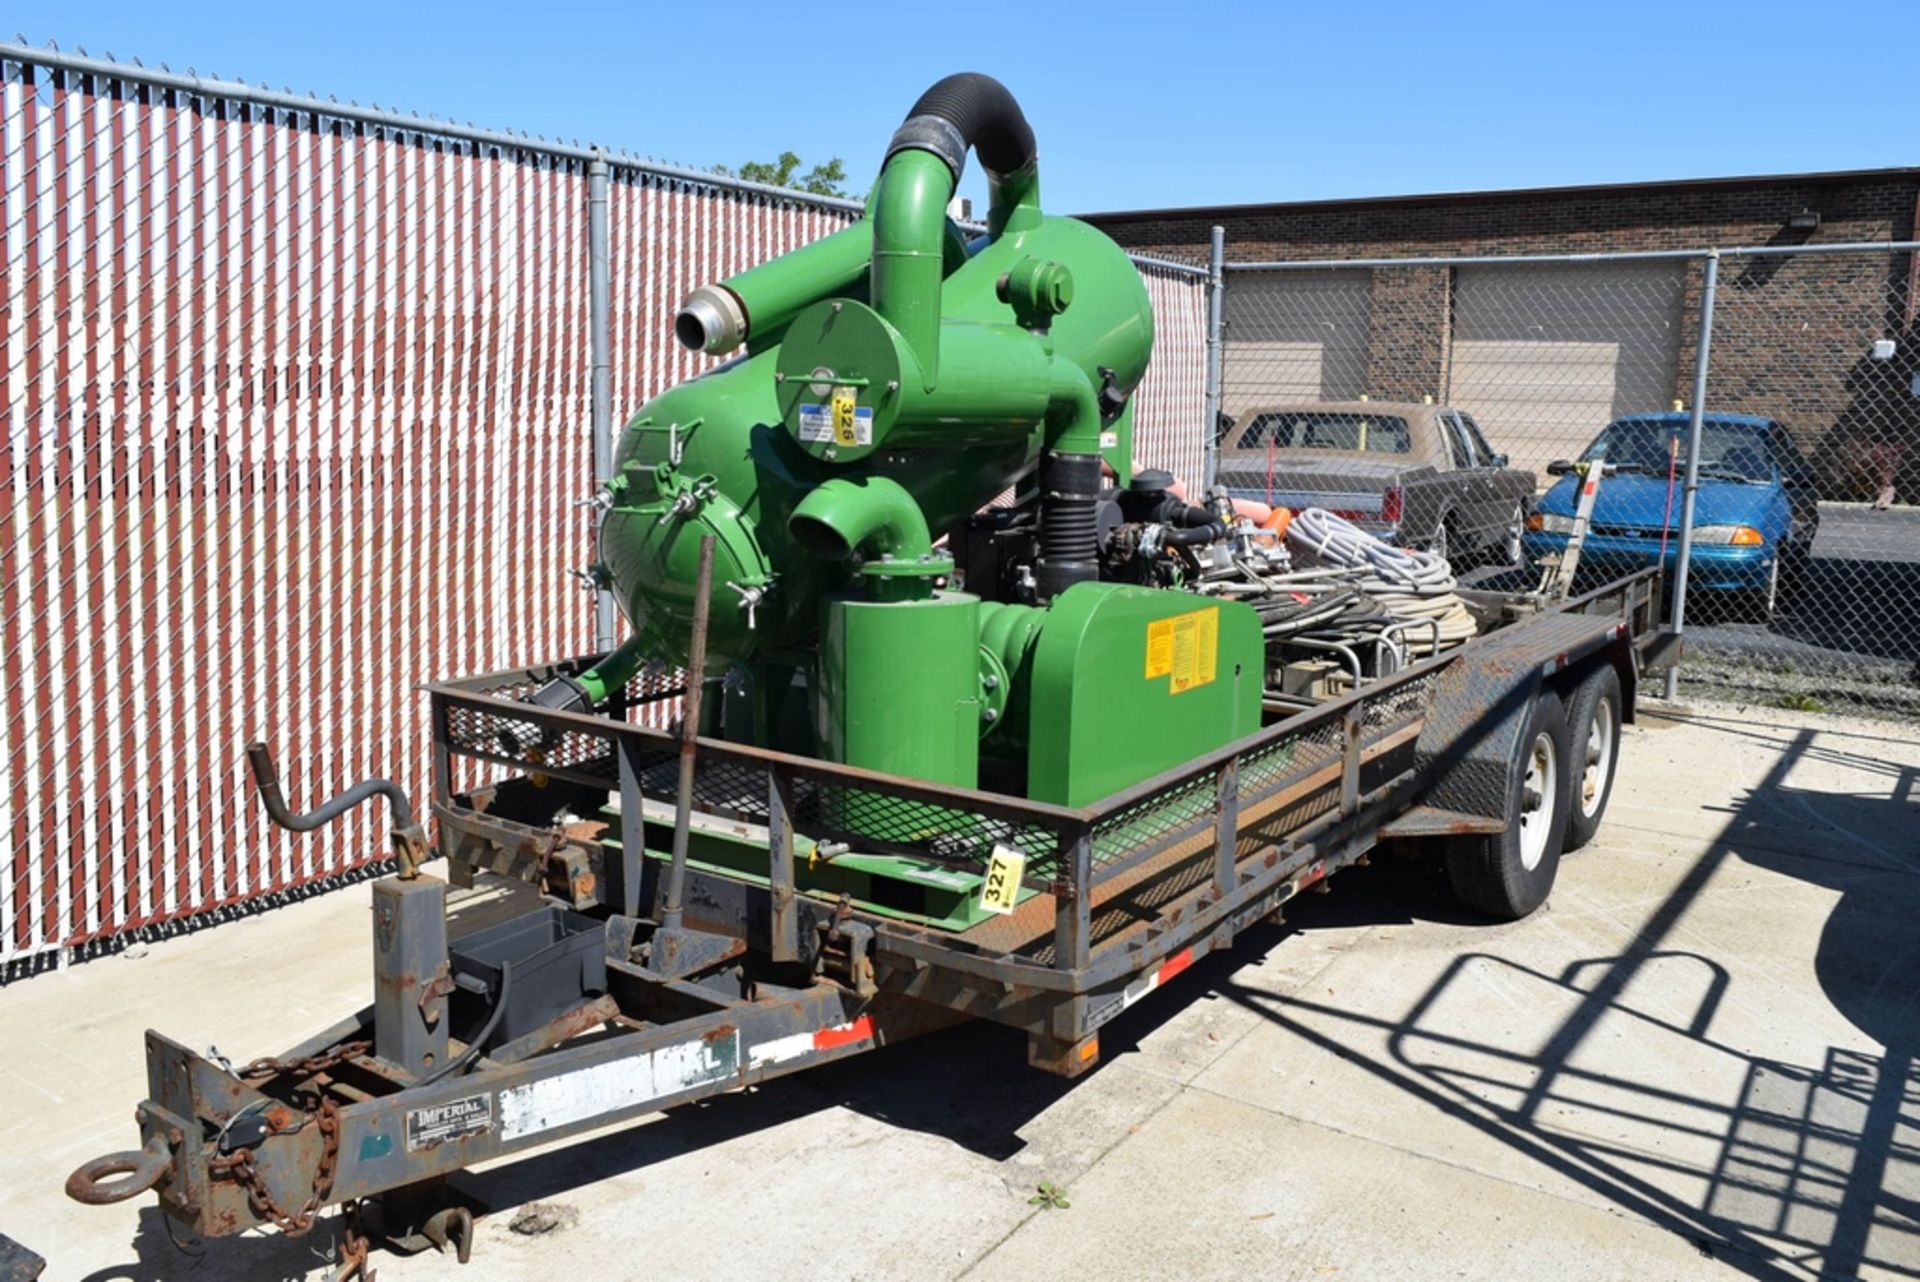 NLB DM33168 PORTABLE VACCUM RECOVERY UNIT S/N: 210220-1, DIESEL, 44 H.P., DRESSER ROTARY BLOWER, 1, - Image 10 of 23